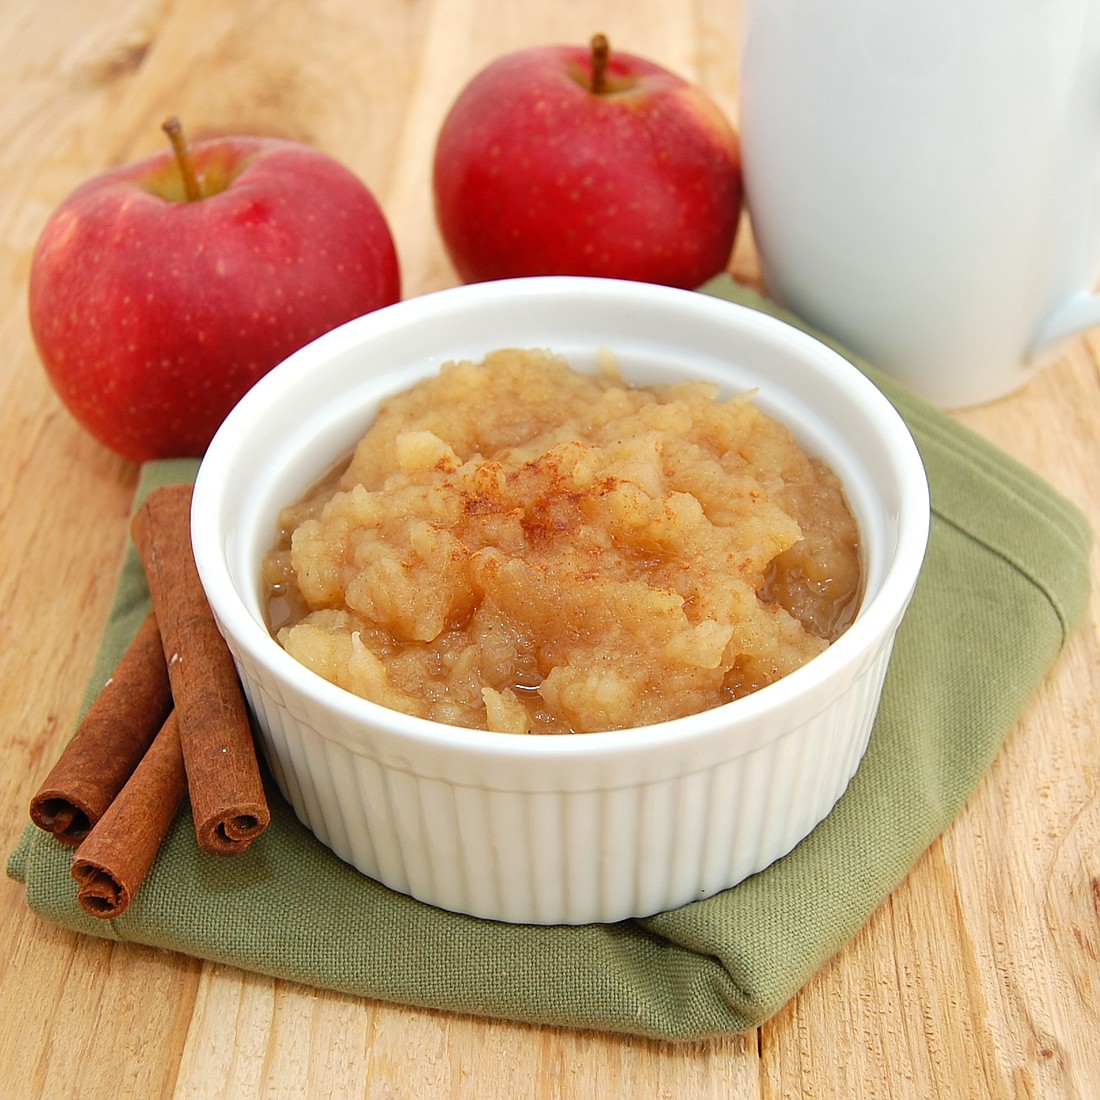 Homemade apple sauce is surprisingly easy to make.